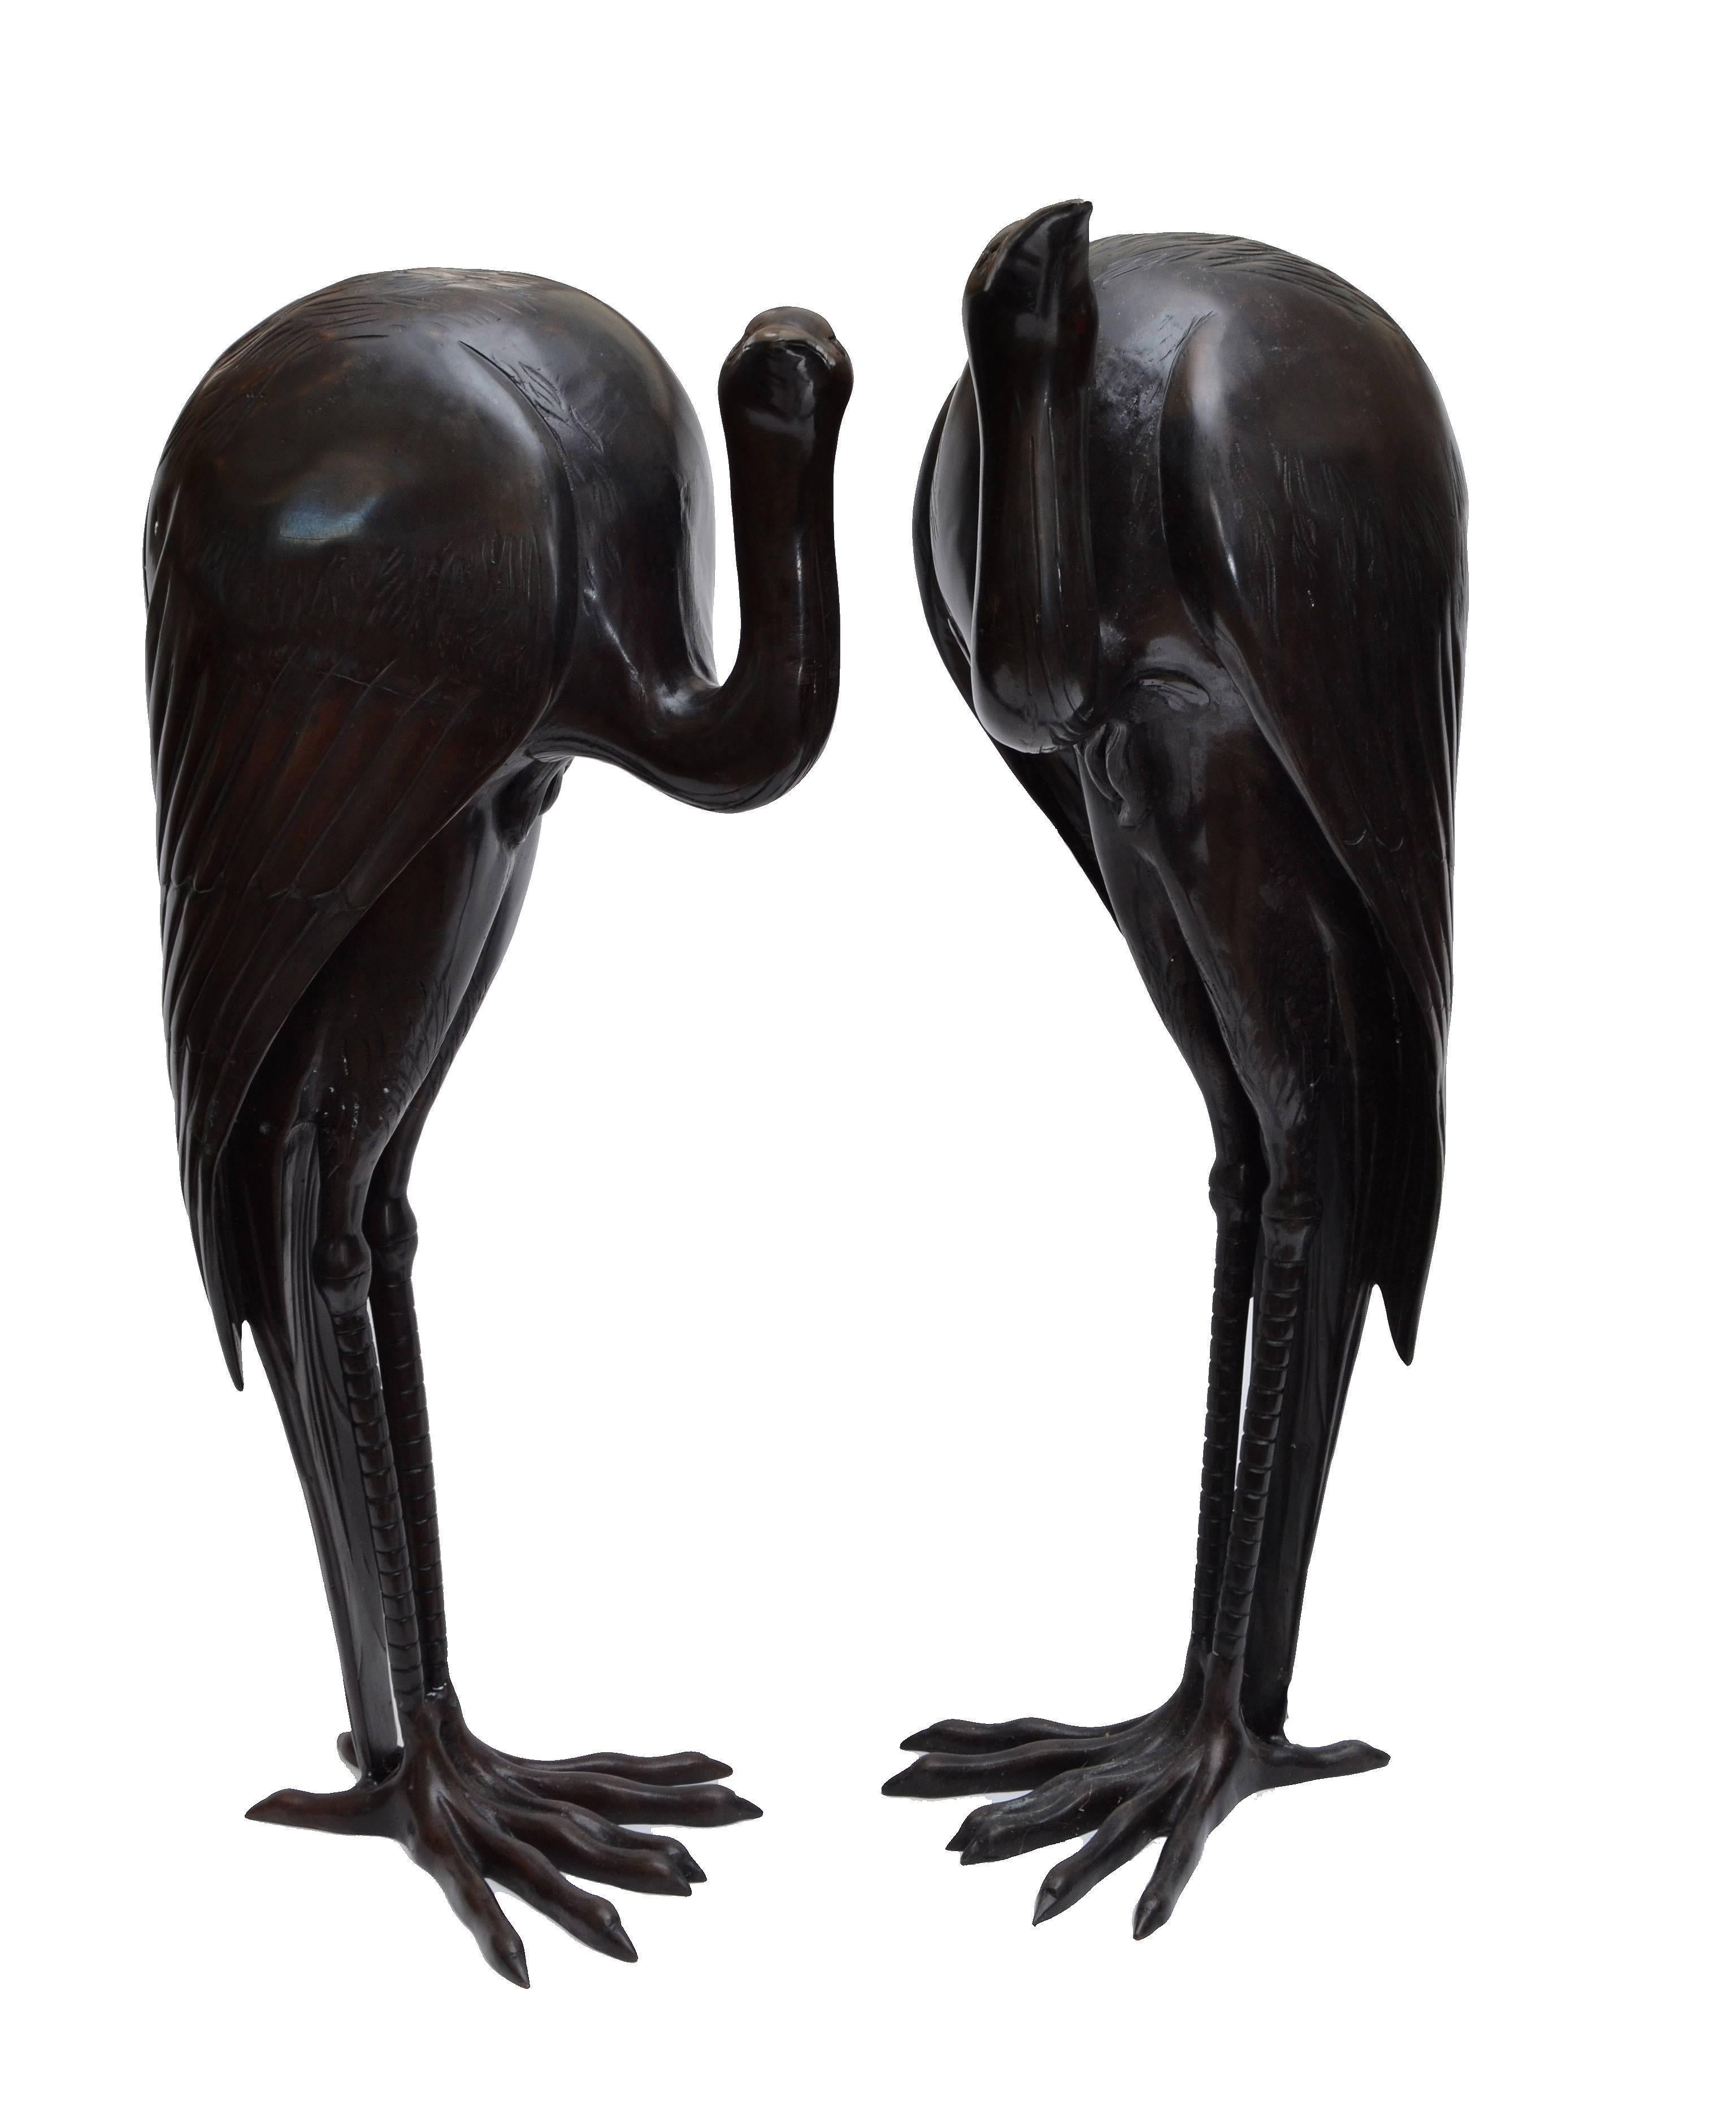 Solid bronze fountain heron sculptures, life-size, a pair.
Very detailed in the craftsmanship and heavy.
Dimension one head to the side:
Measure: Depth 13 inches, length 16.0 inches, height 28.0 inches.